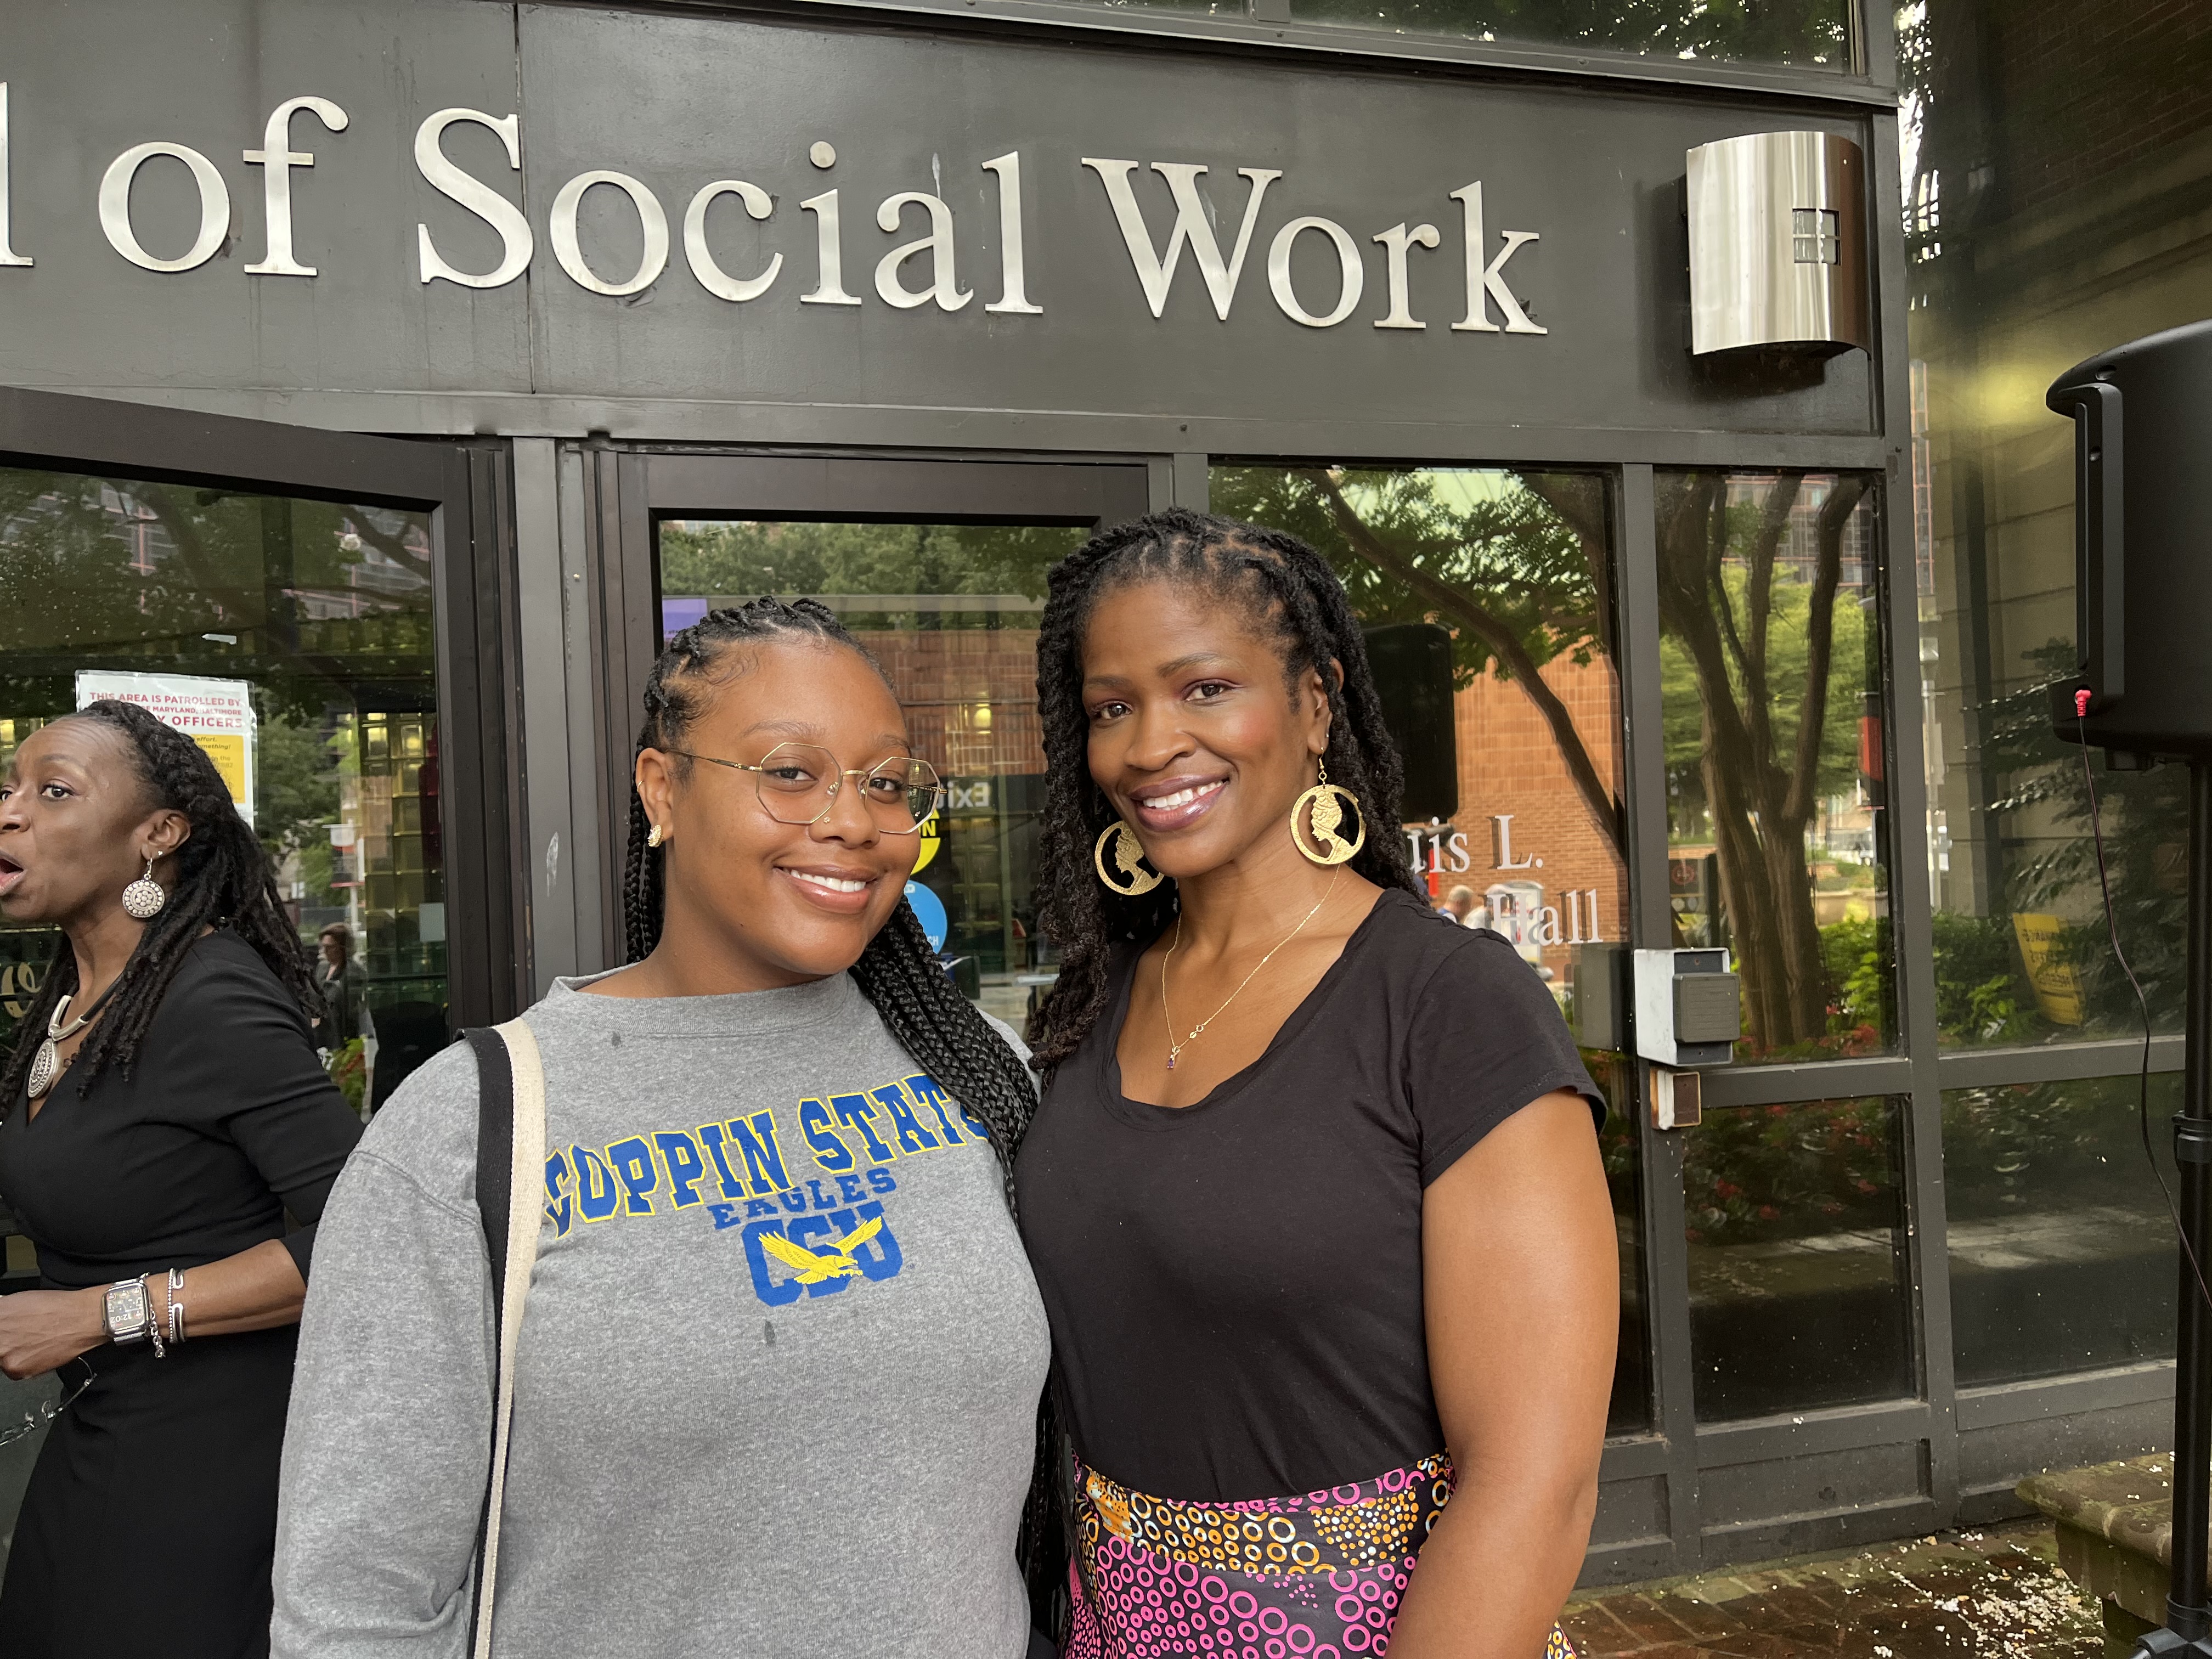 A young woman on the right wearing a Coppin State sweatshirt smiles beside an older woman on right with braids